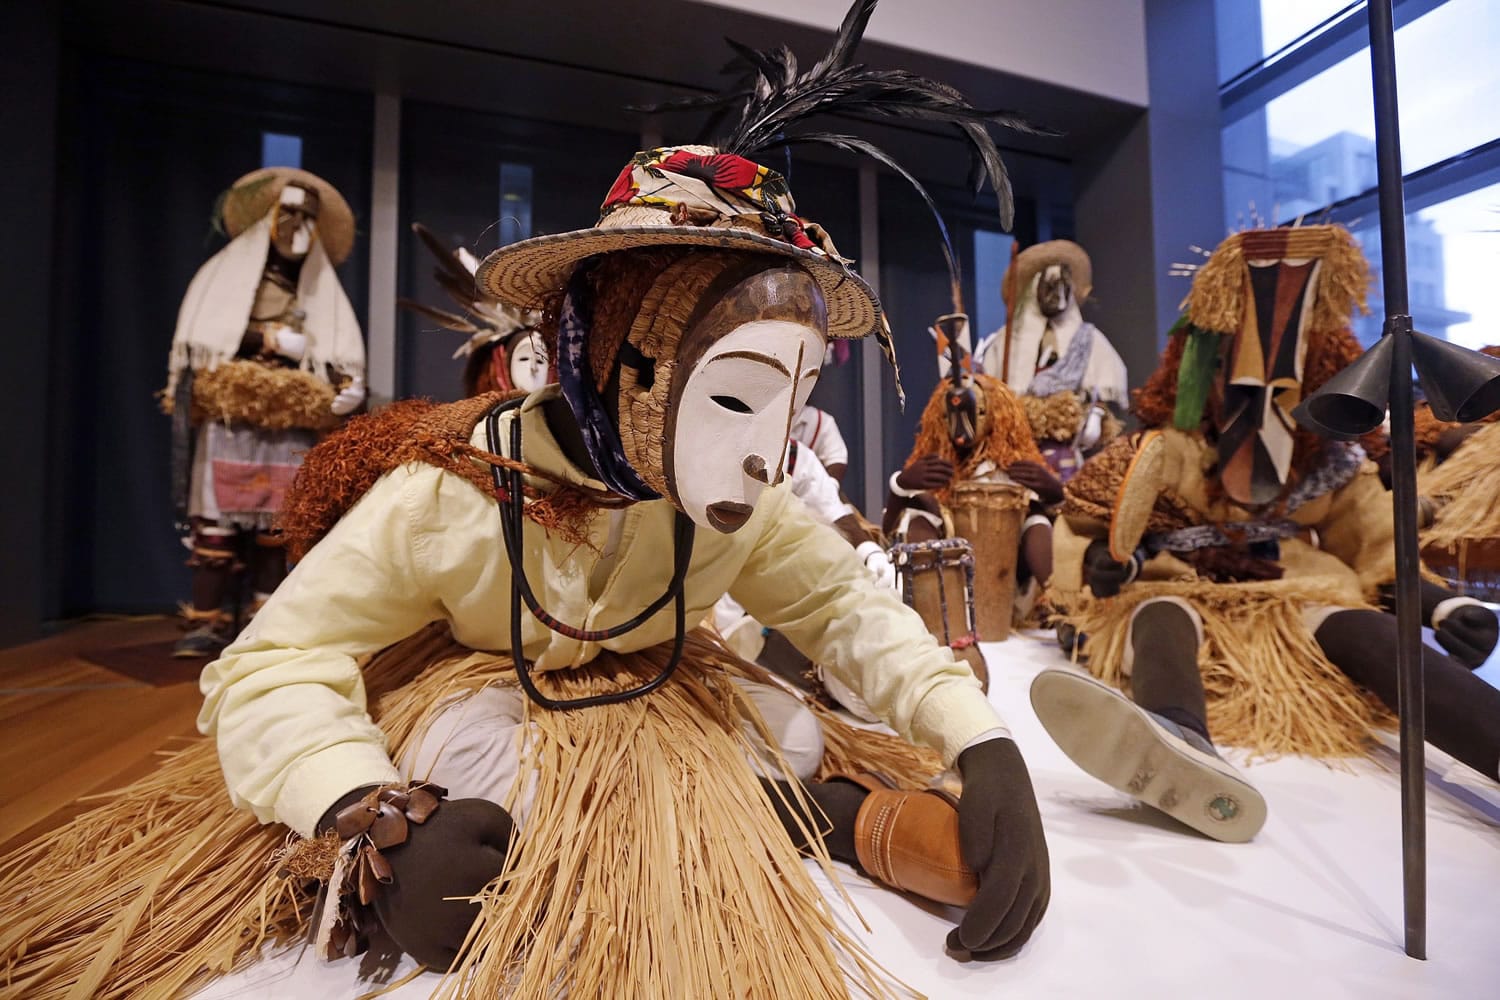 Nigerian masks from the 1950s are displayed Sunday with costumes to create a &quot;masquerade parade&quot; as part of the show &quot;Disguise: Masks